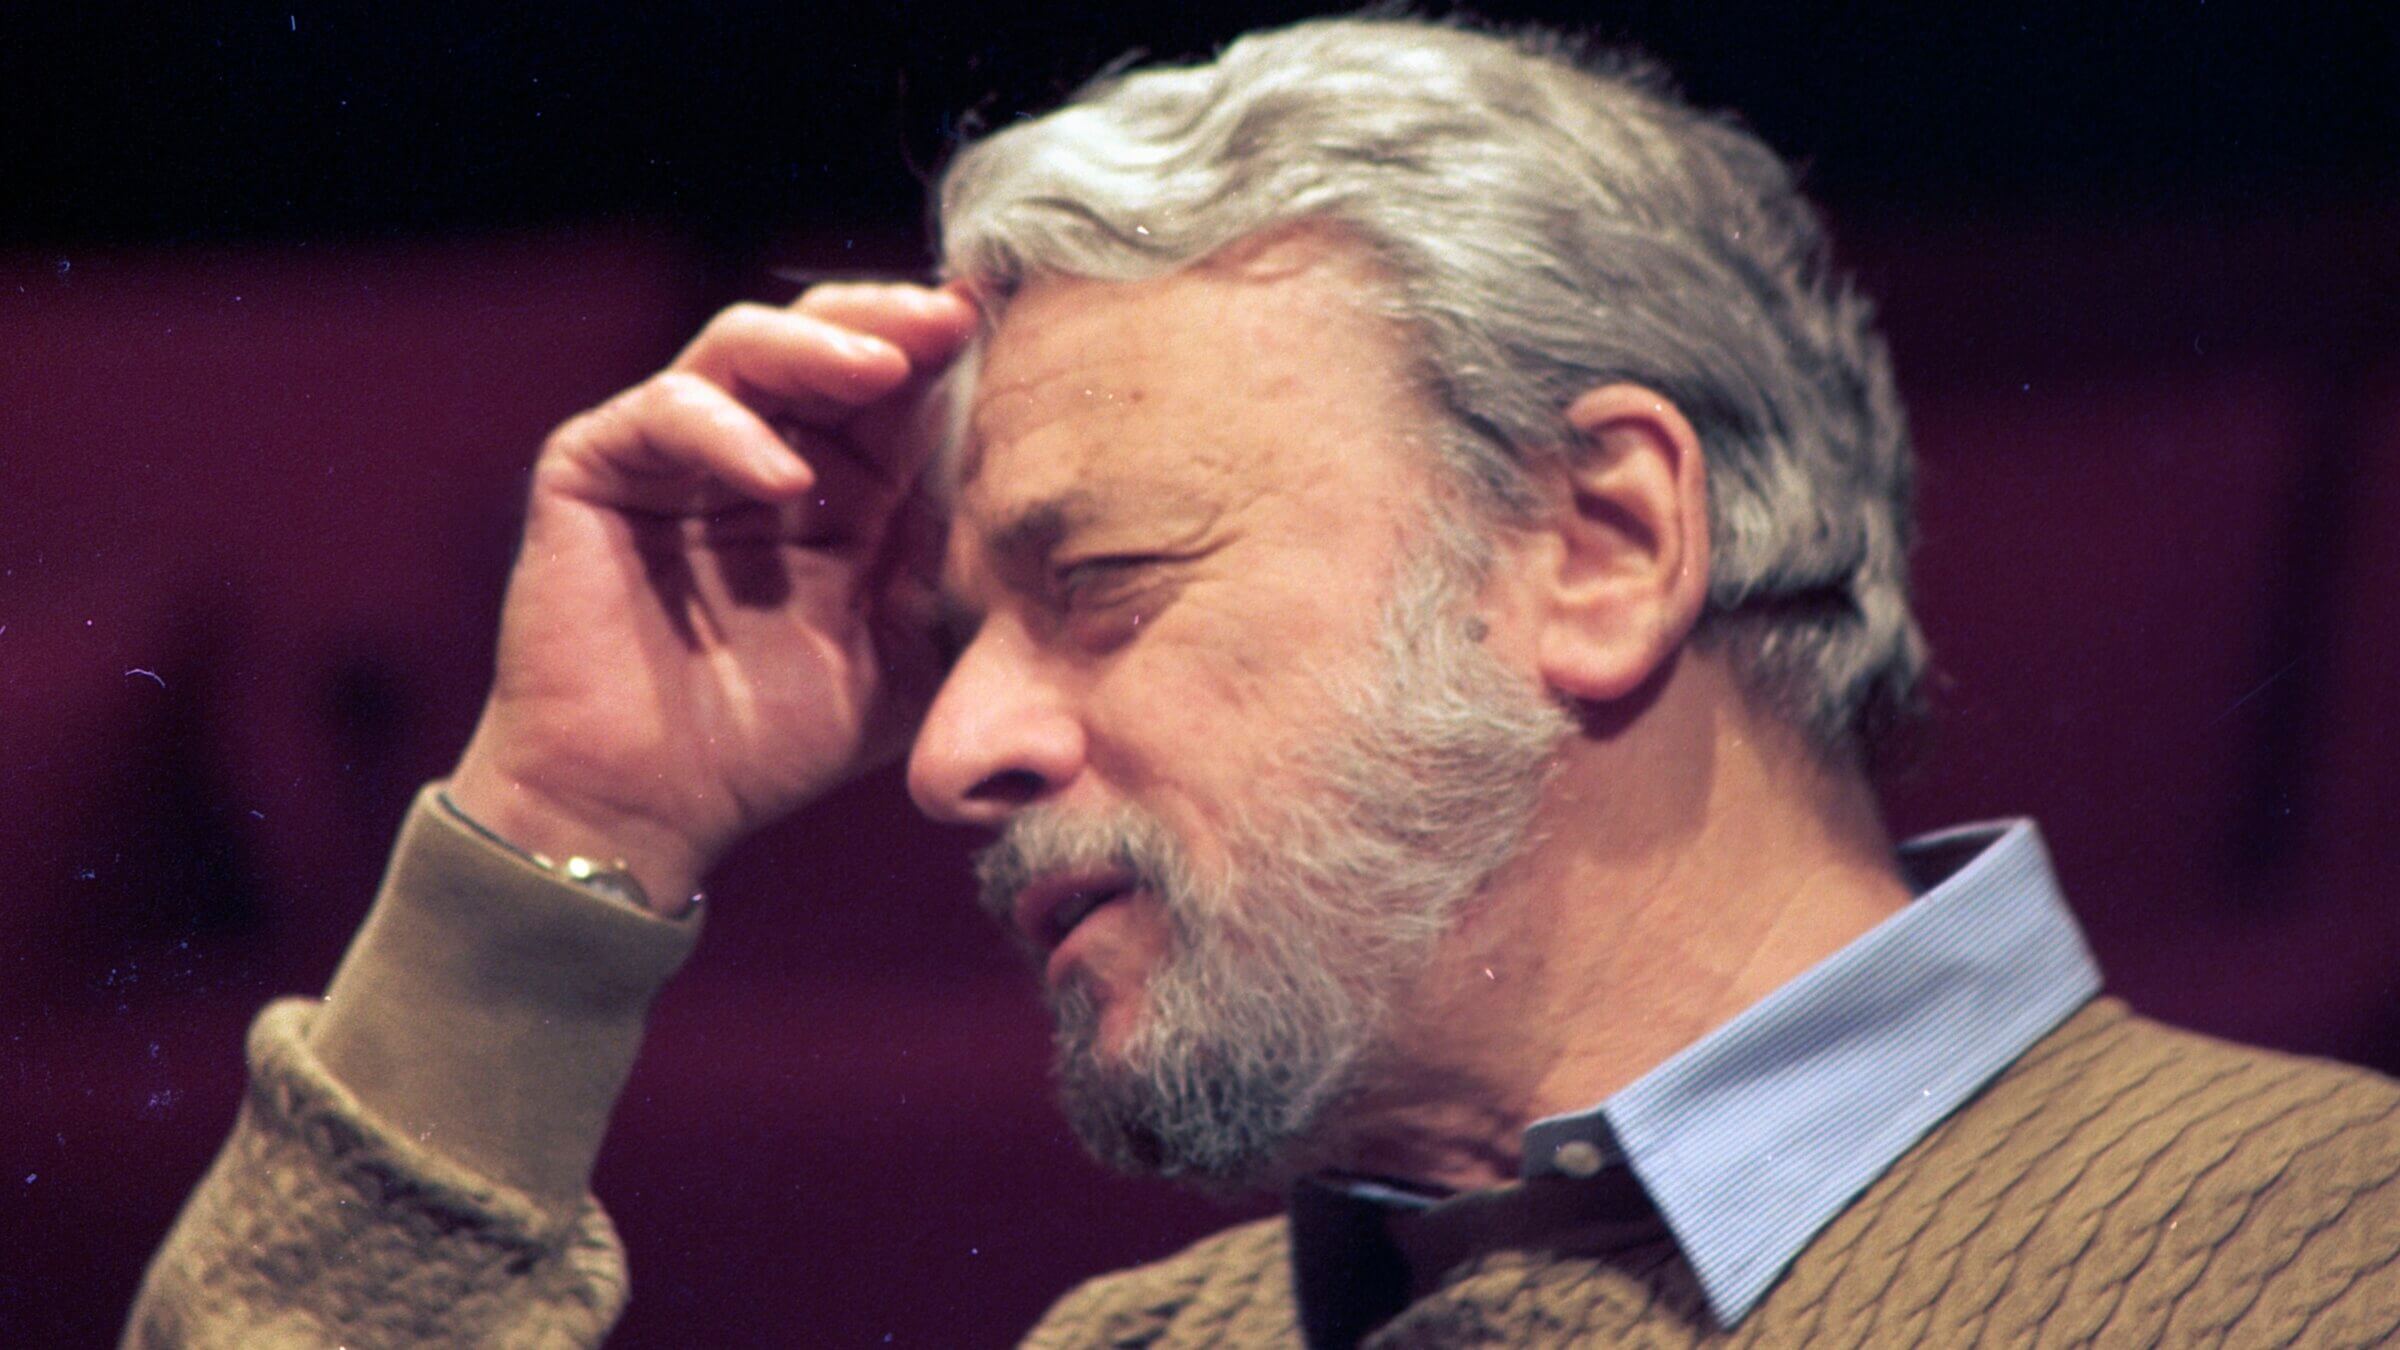 Stephen Sondheim could probably have solved the <i>Glass Onion</i> mystery in under 90 minutes. 